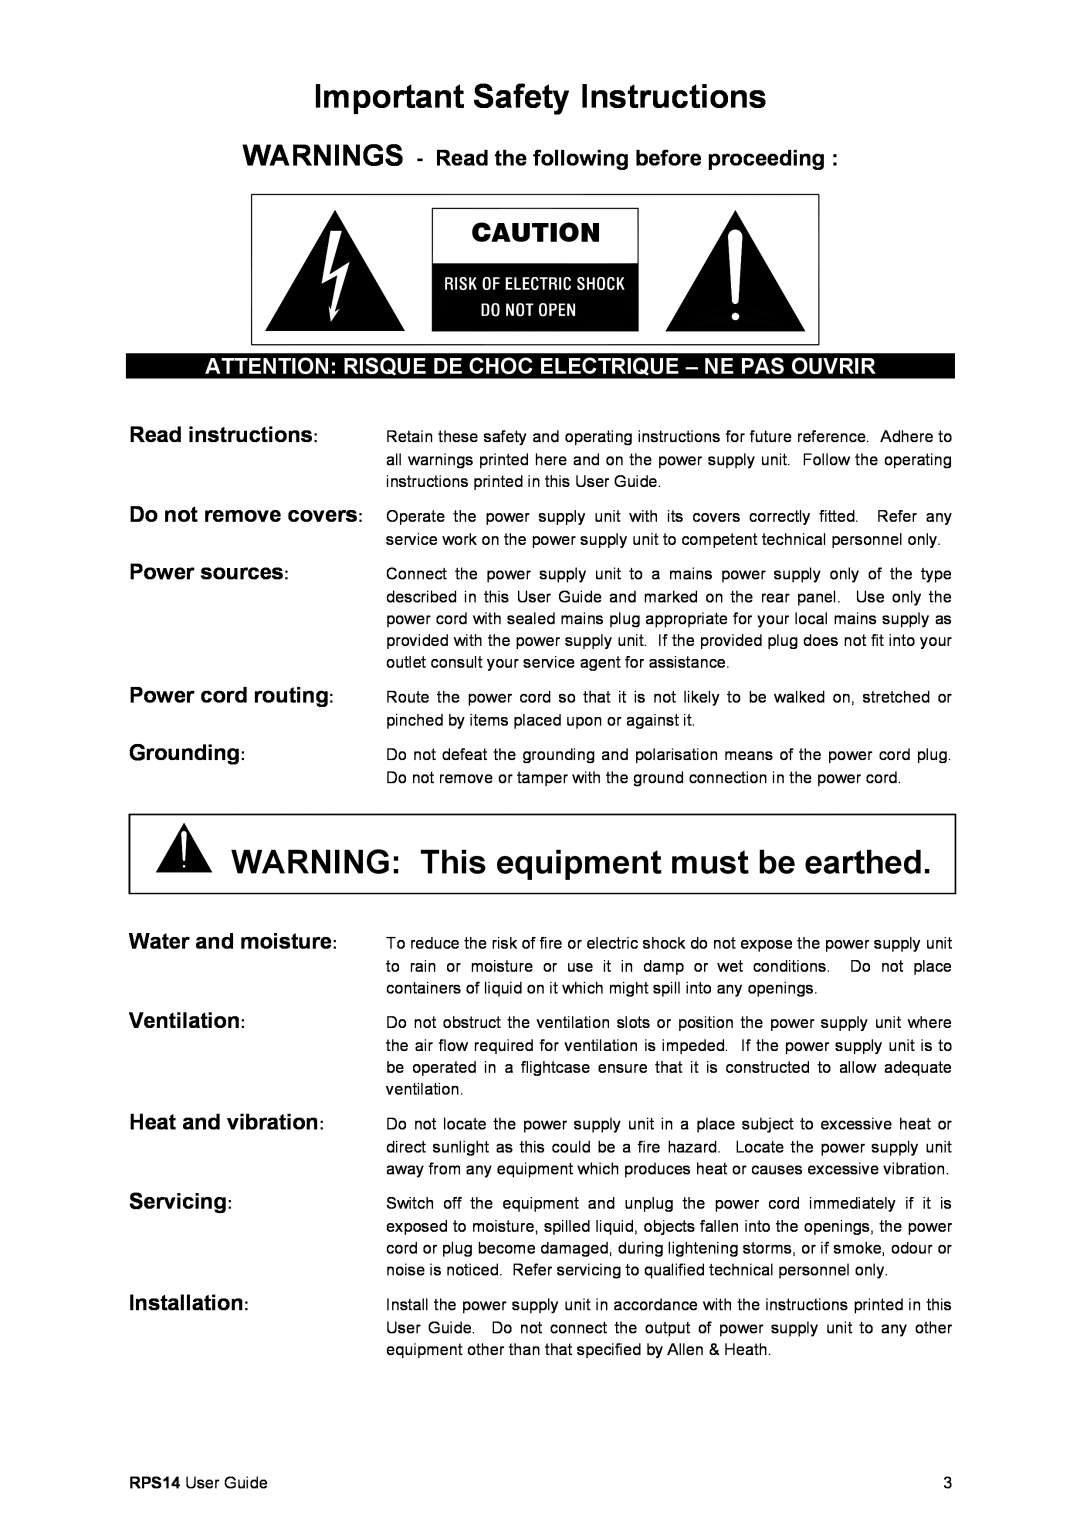 Addlogix RPS14 manual Important Safety Instructions, WARNING This equipment must be earthed, Installation 